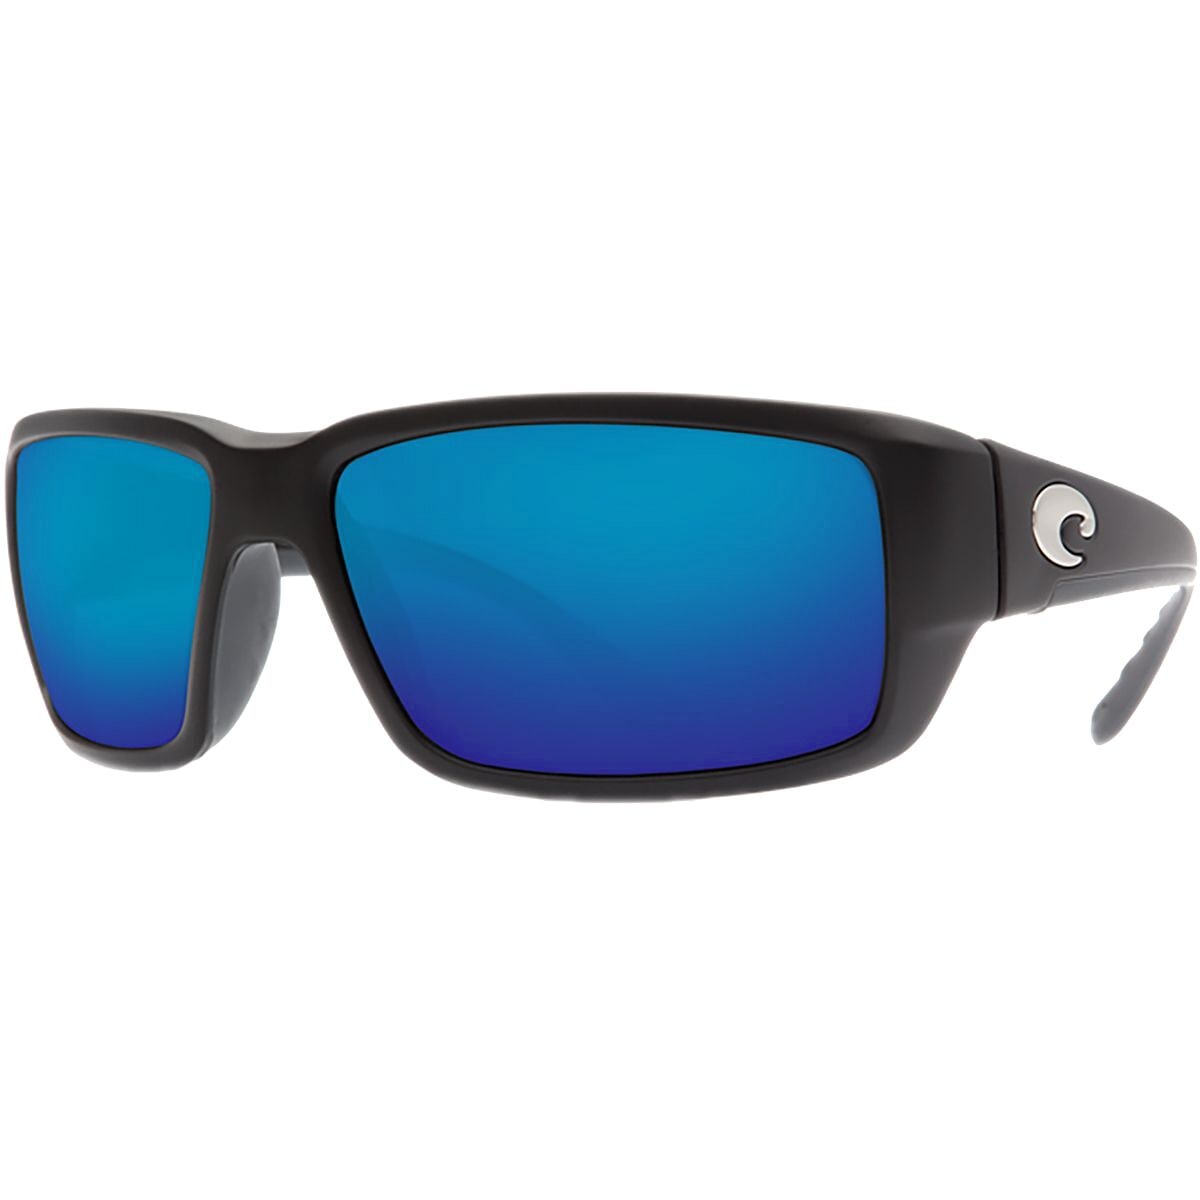 Pre-owned Costa Del Mar Costa Fantail 580g Polarized Sunglasses In Blackout Frame/blue Mirror 580g